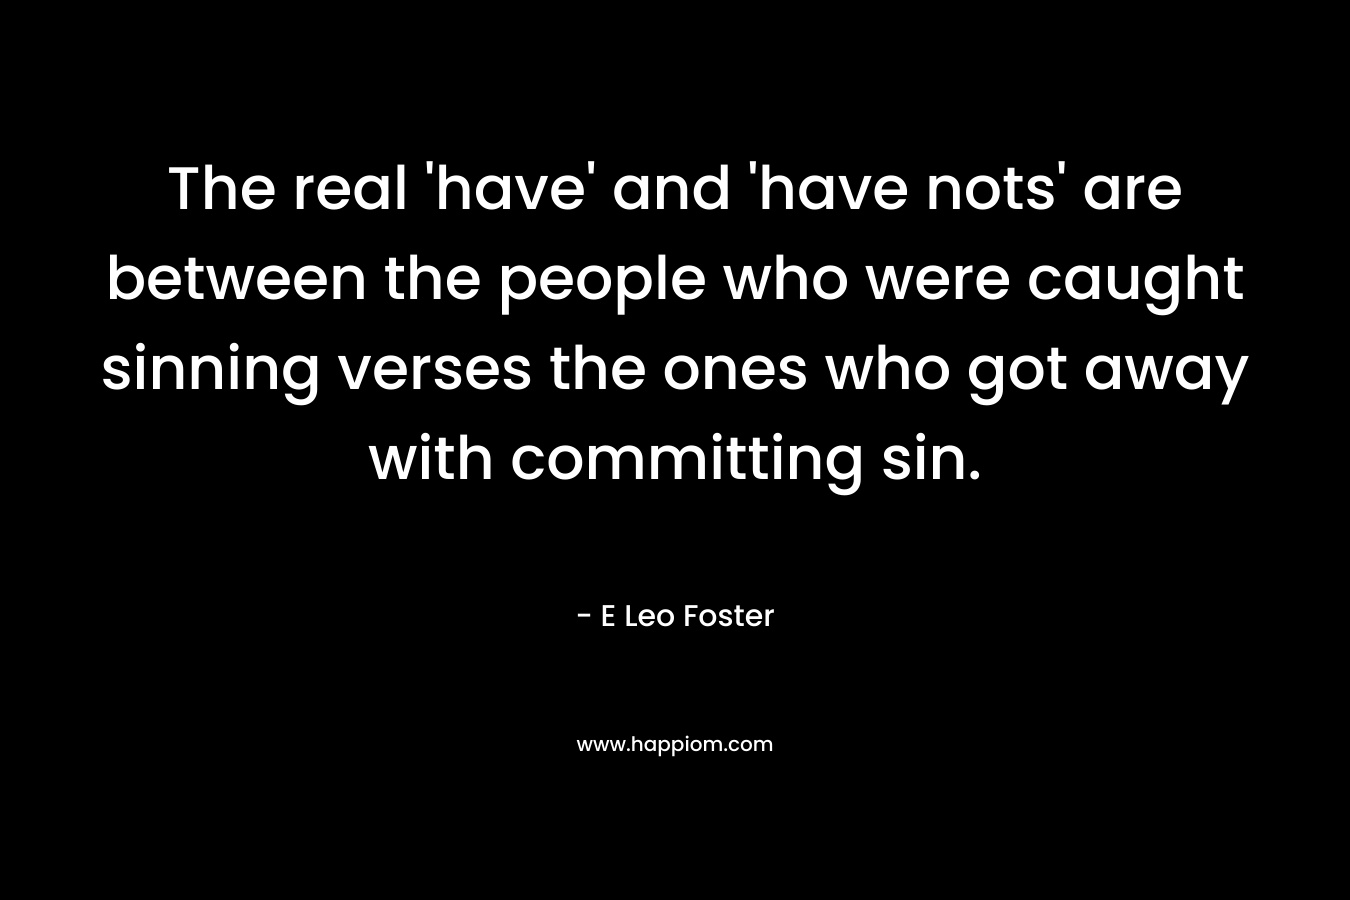 The real 'have' and 'have nots' are between the people who were caught sinning verses the ones who got away with committing sin.